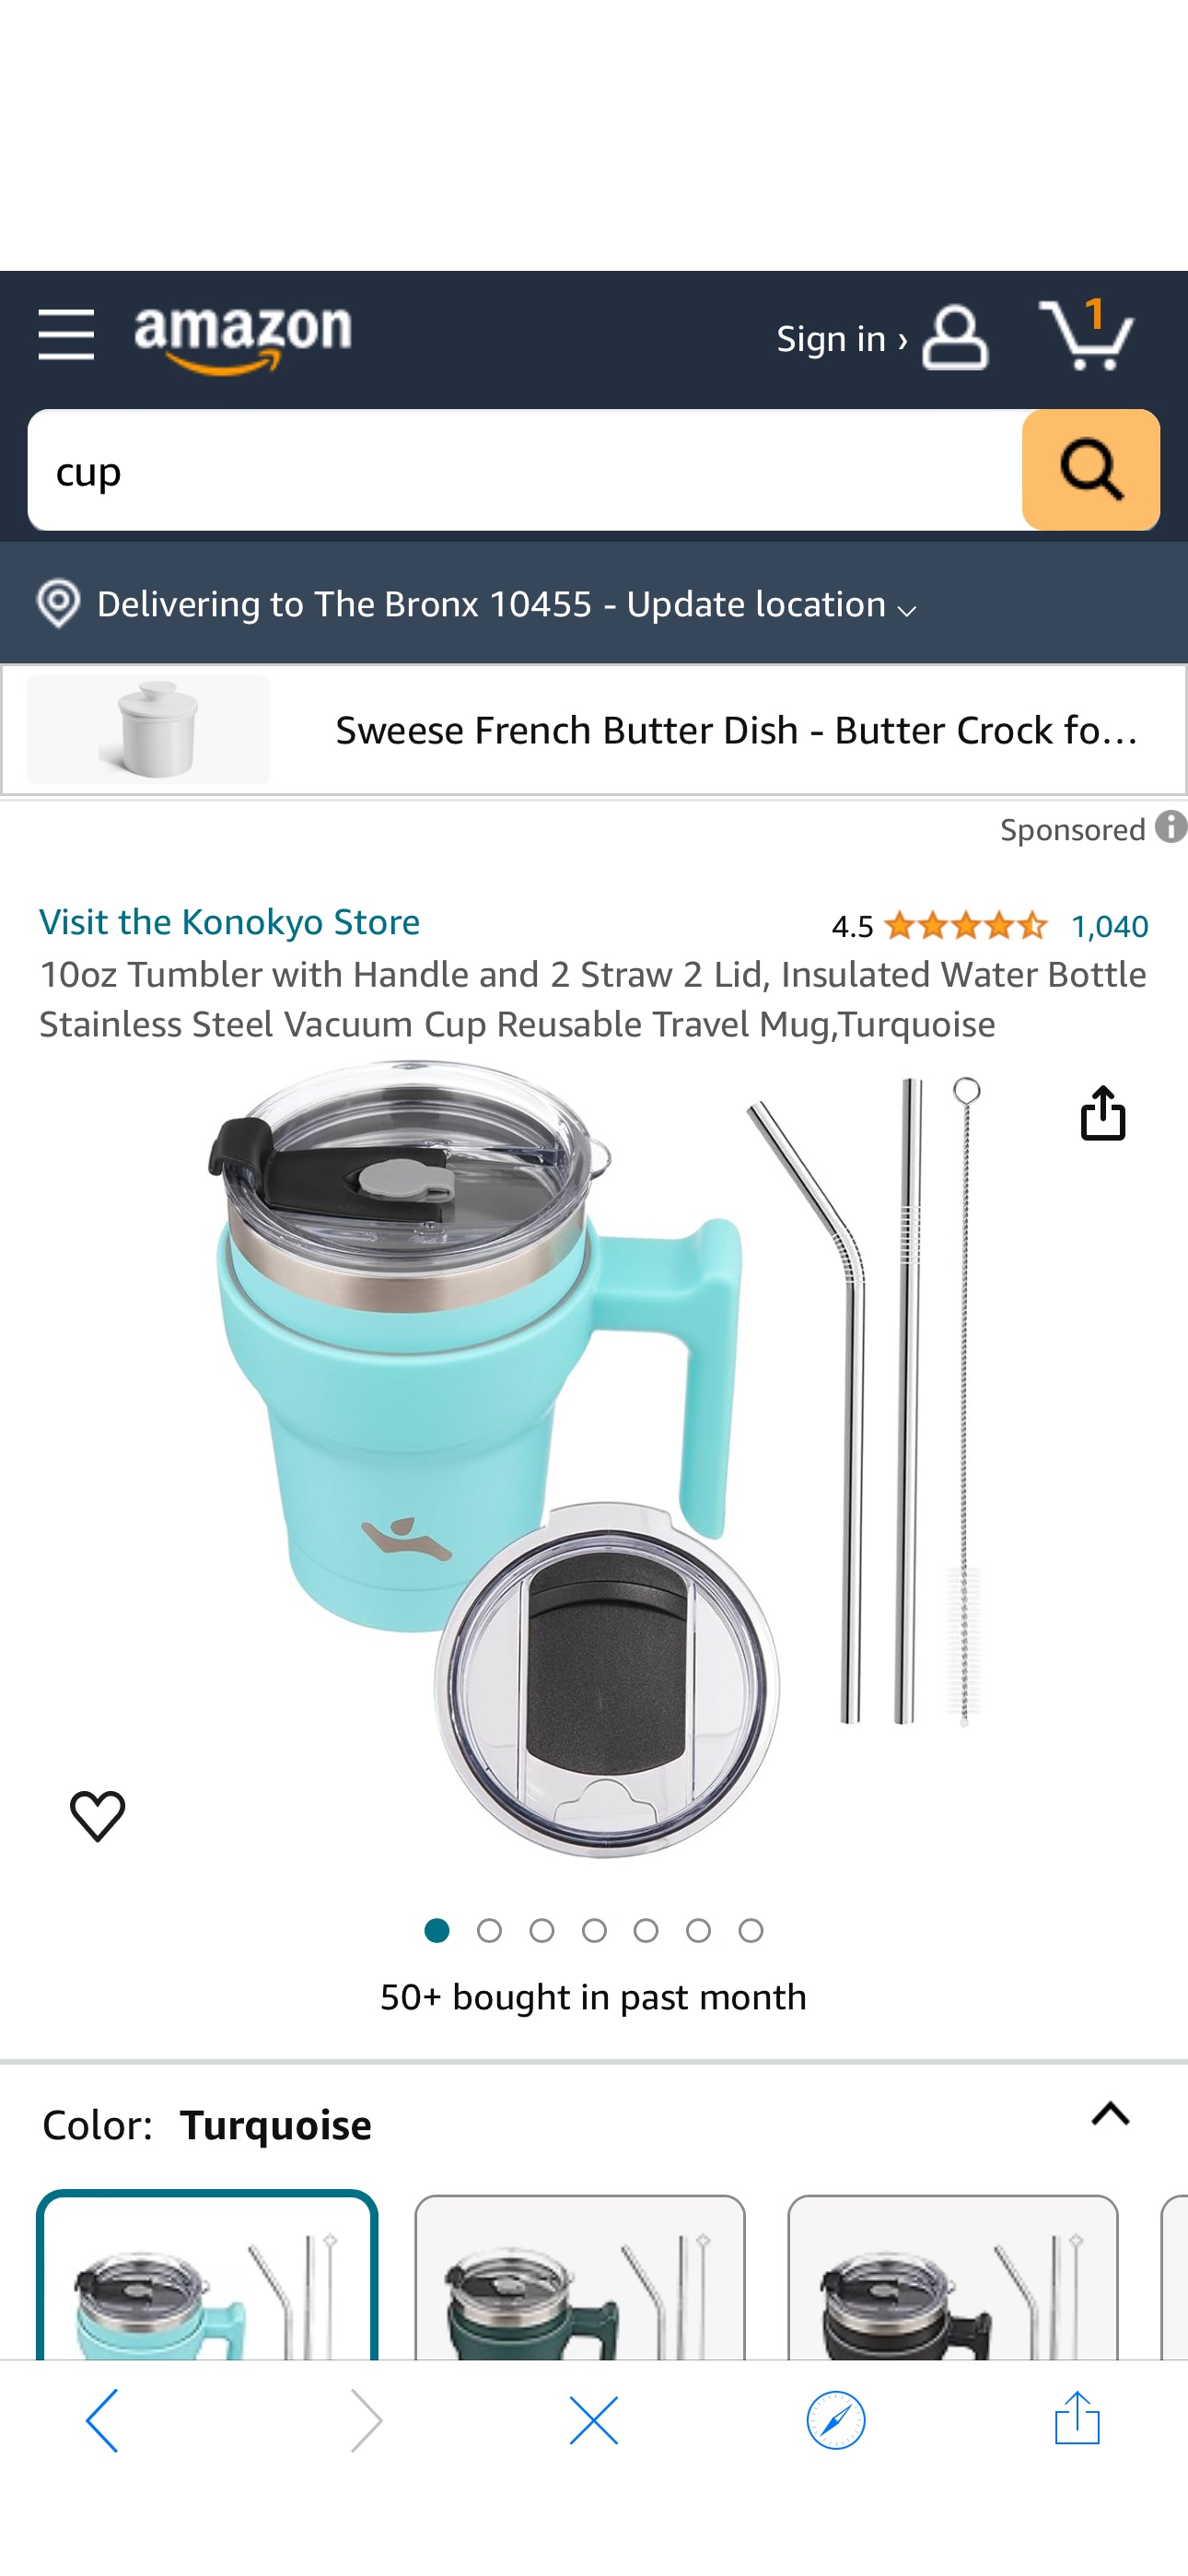 Amazon.com | Konokyo 10oz Tumbler with Handle and 2 Straw 2 Lid, Insulated Water Bottle Stainless Steel Vacuum Cup Reusable Travel Mug,Turquoise: Tumblers & Water Glasses